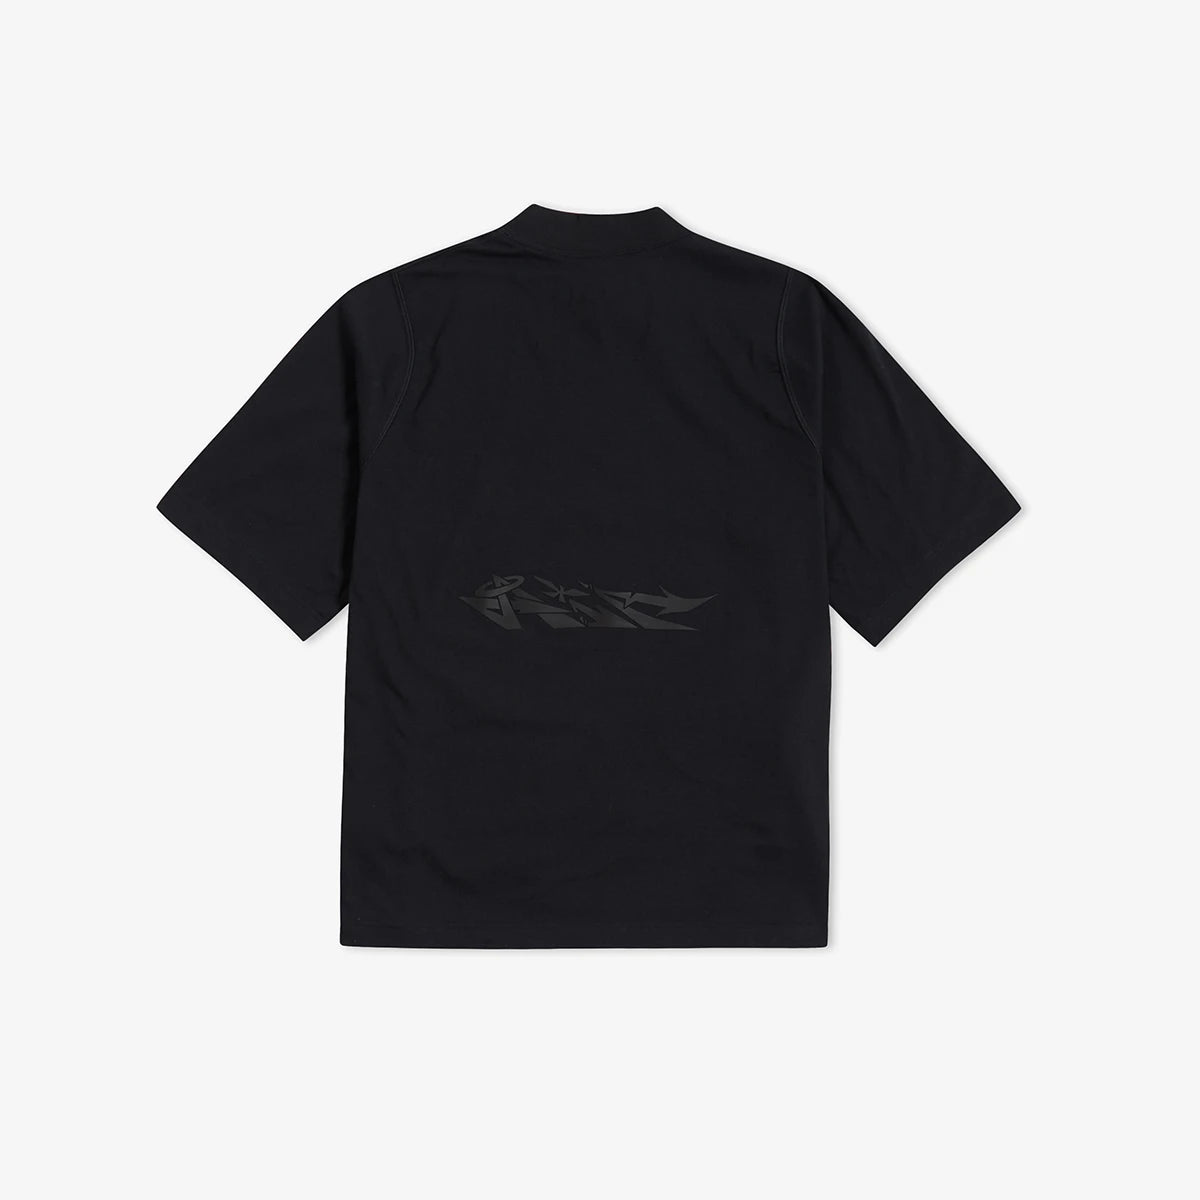 Nike x Off-White Short Sleeve Top